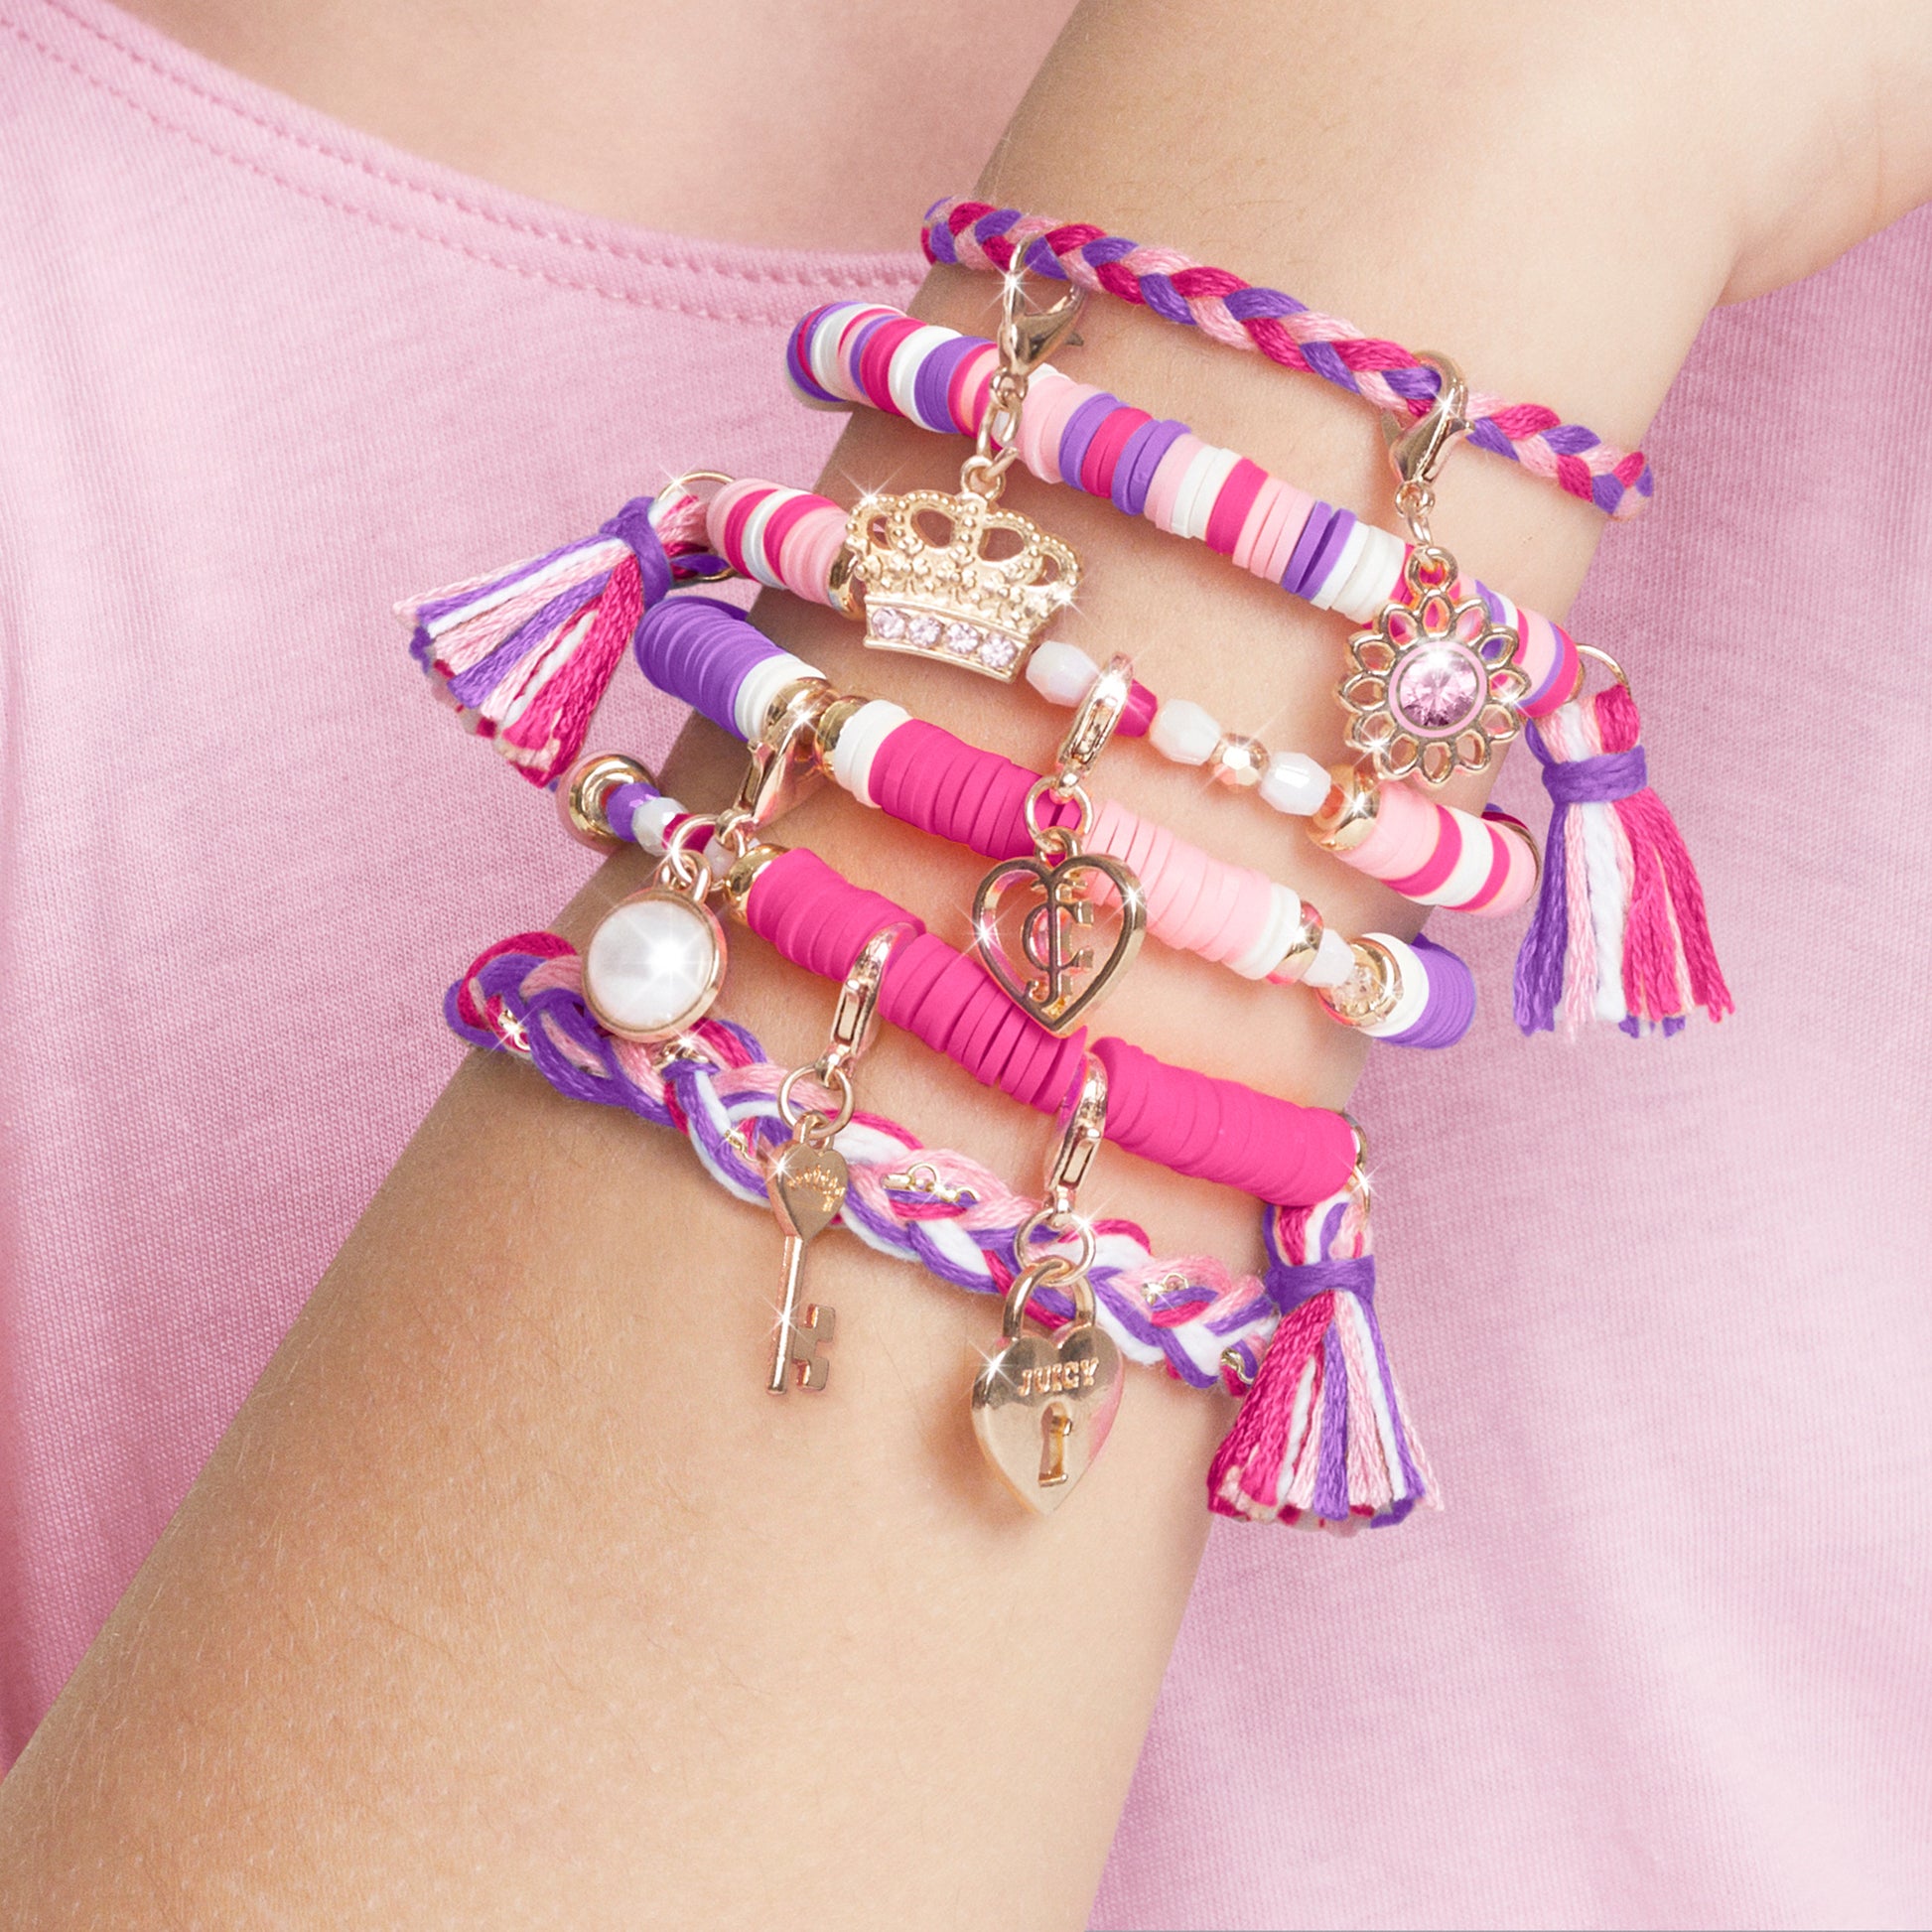 DIY Bracelets With The Juicy Couture Glamour Stacks​ 